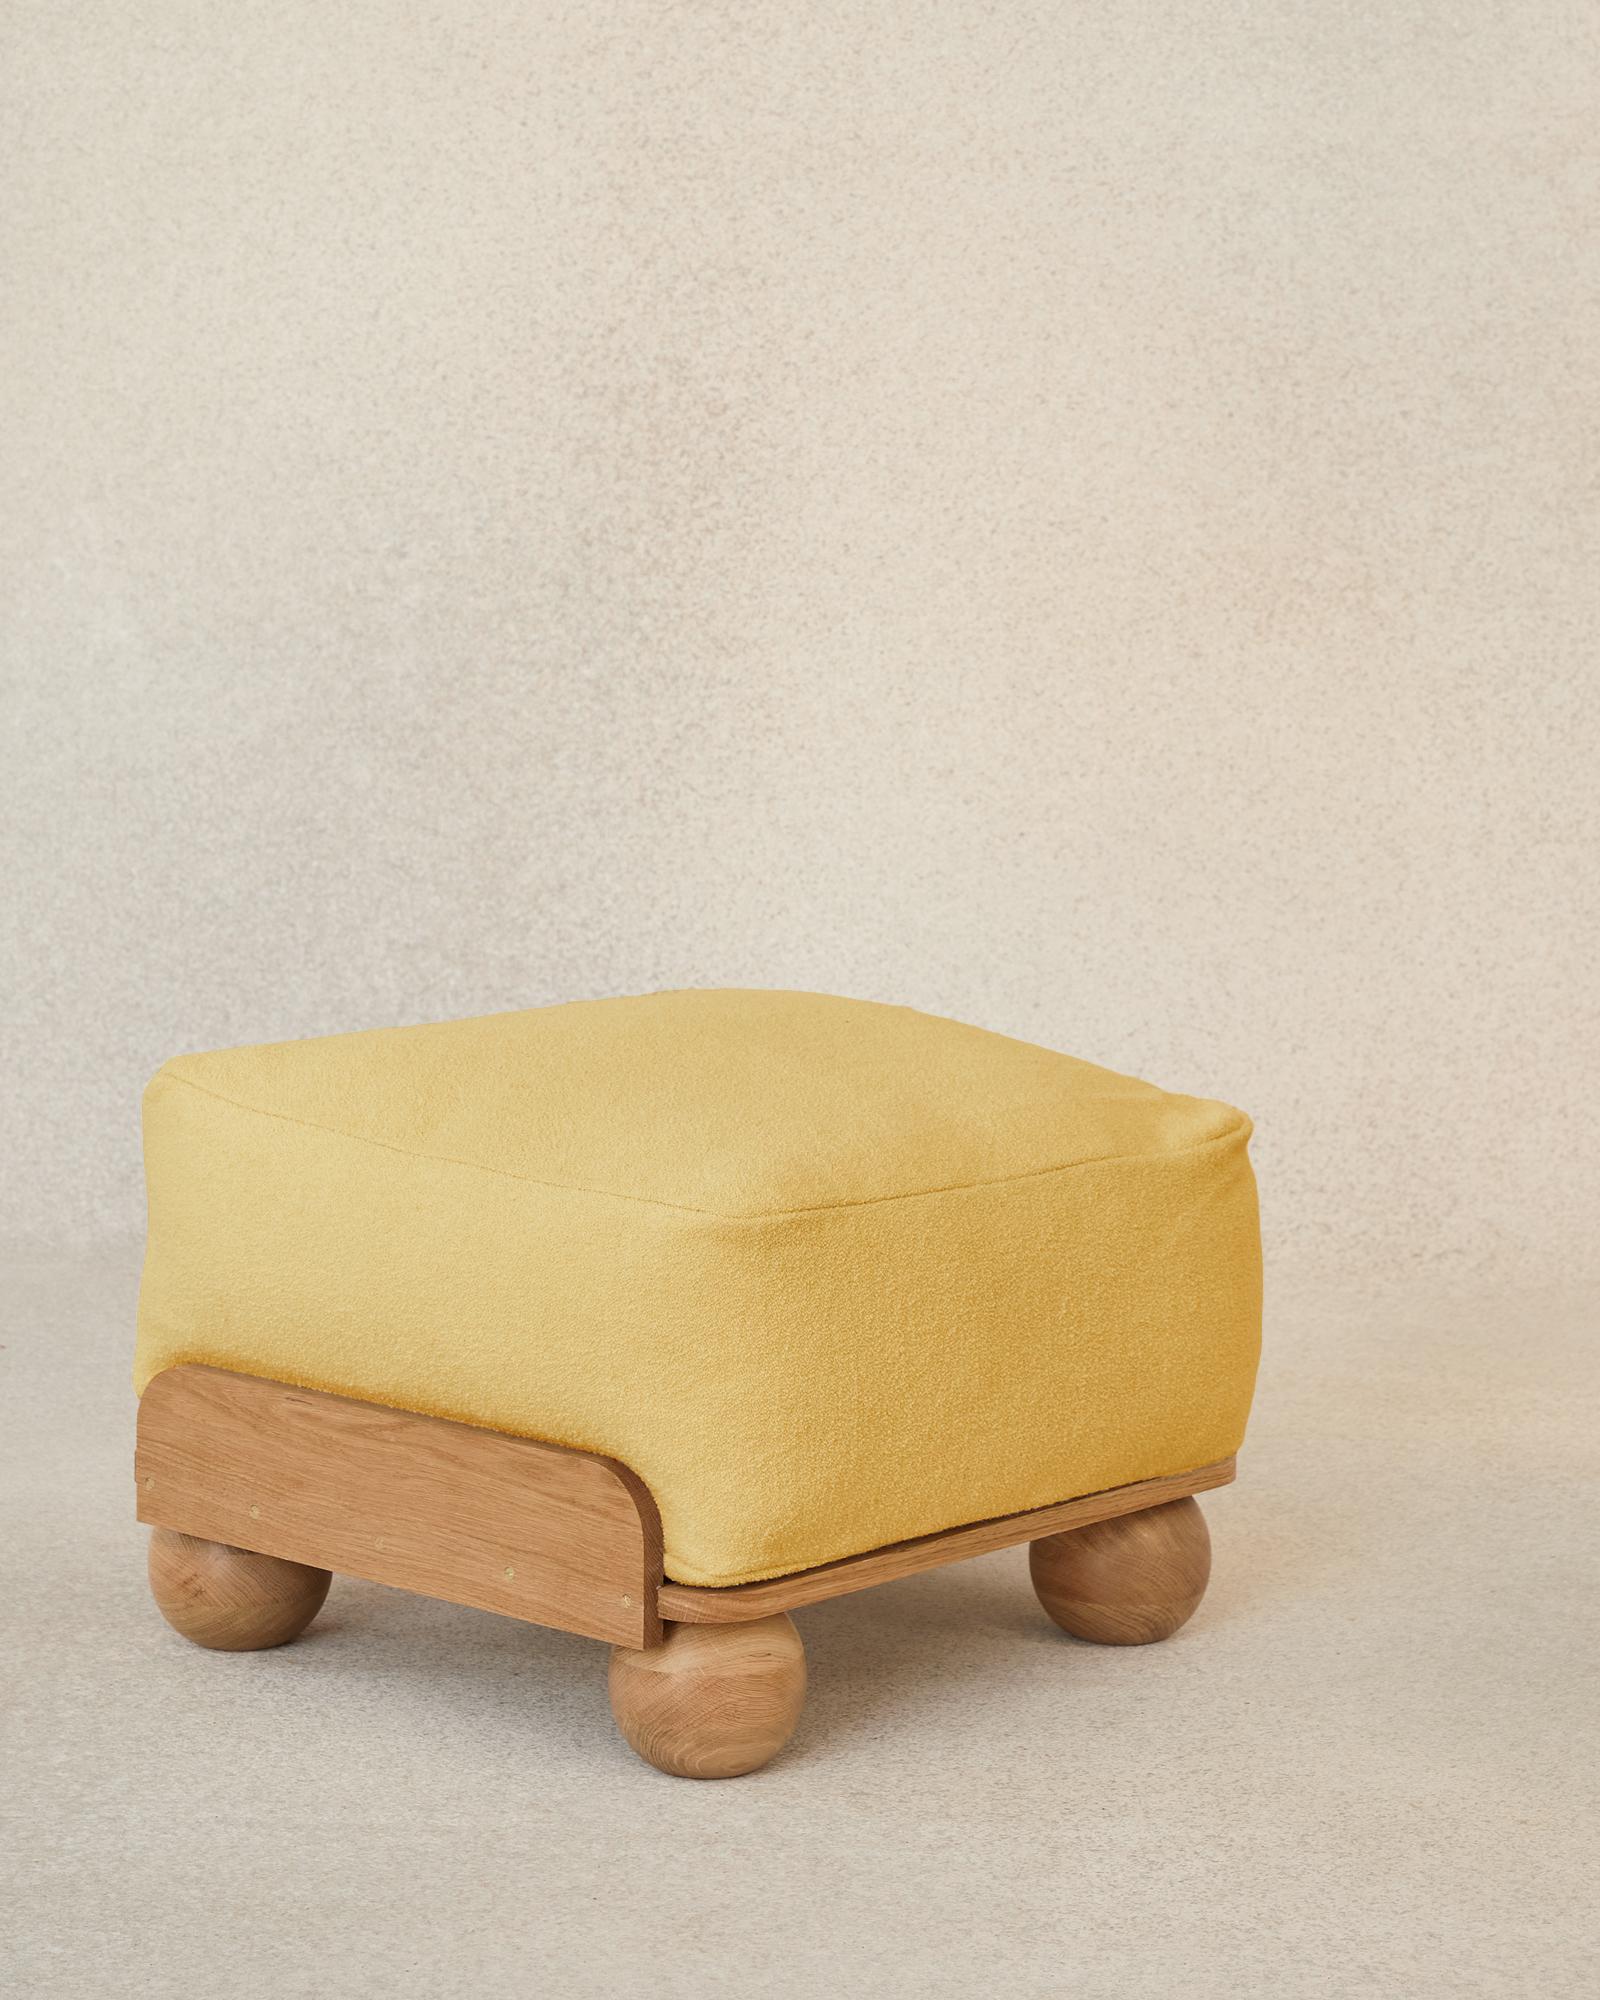 The Cove Footstool is a simple, arm- and backless seat to put your feet up. The Cove Footstool can be combined into a daybed of any length or paired with the Cove slipper or armchair to make a chaise.

Like its Cove siblings, the Footstool reveals